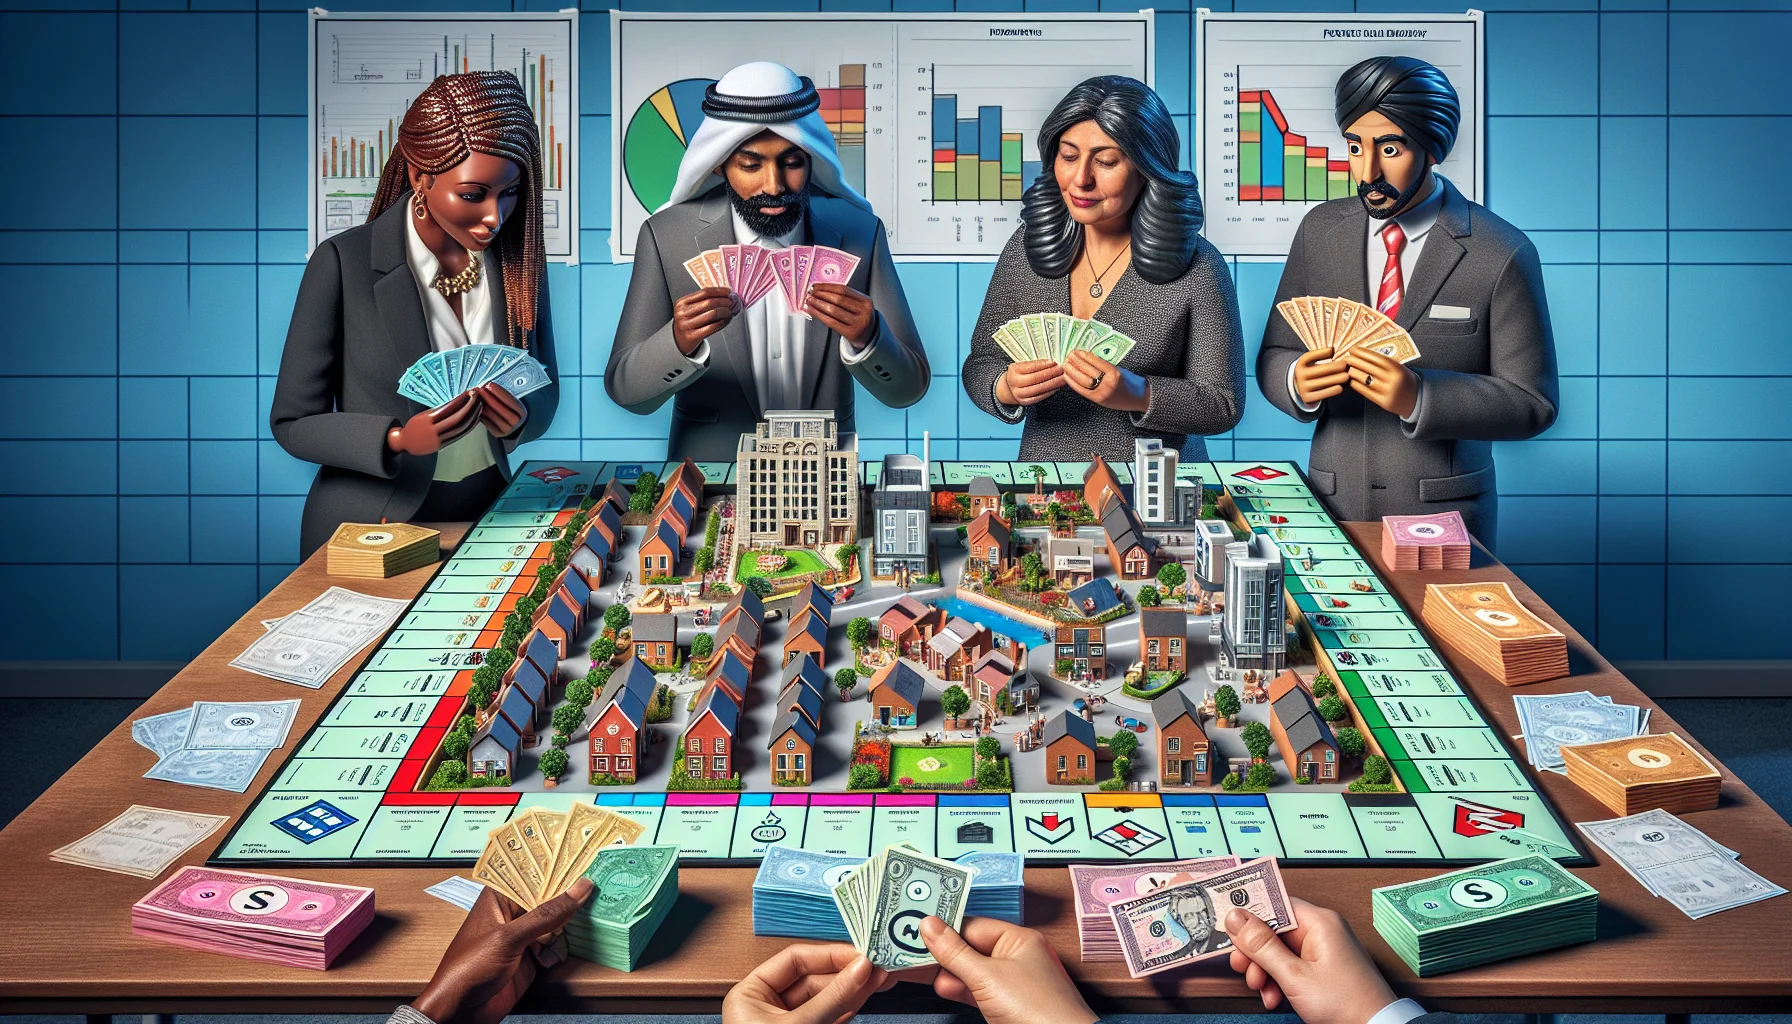 Generate a humorous and realistic image showing the ideal scenario in the realm of real estate investment. Picture a beautifully made detailed model of a small town, with a handful of investors - a Black woman, a Middle-Eastern man, a South Asian woman, and a Hispanic man - huddled together, each holding small sections of the town under a magnifying glass. Each section they hold yields signs of prosperity like renovated buildings, bustling markets, and flourishing parks. Surrounding them, are stacks of game Monopoly-style currency, blueprints, and graphs showing upward trends. Add a banner in the sky saying 'Perfect Real Estate Investments'.